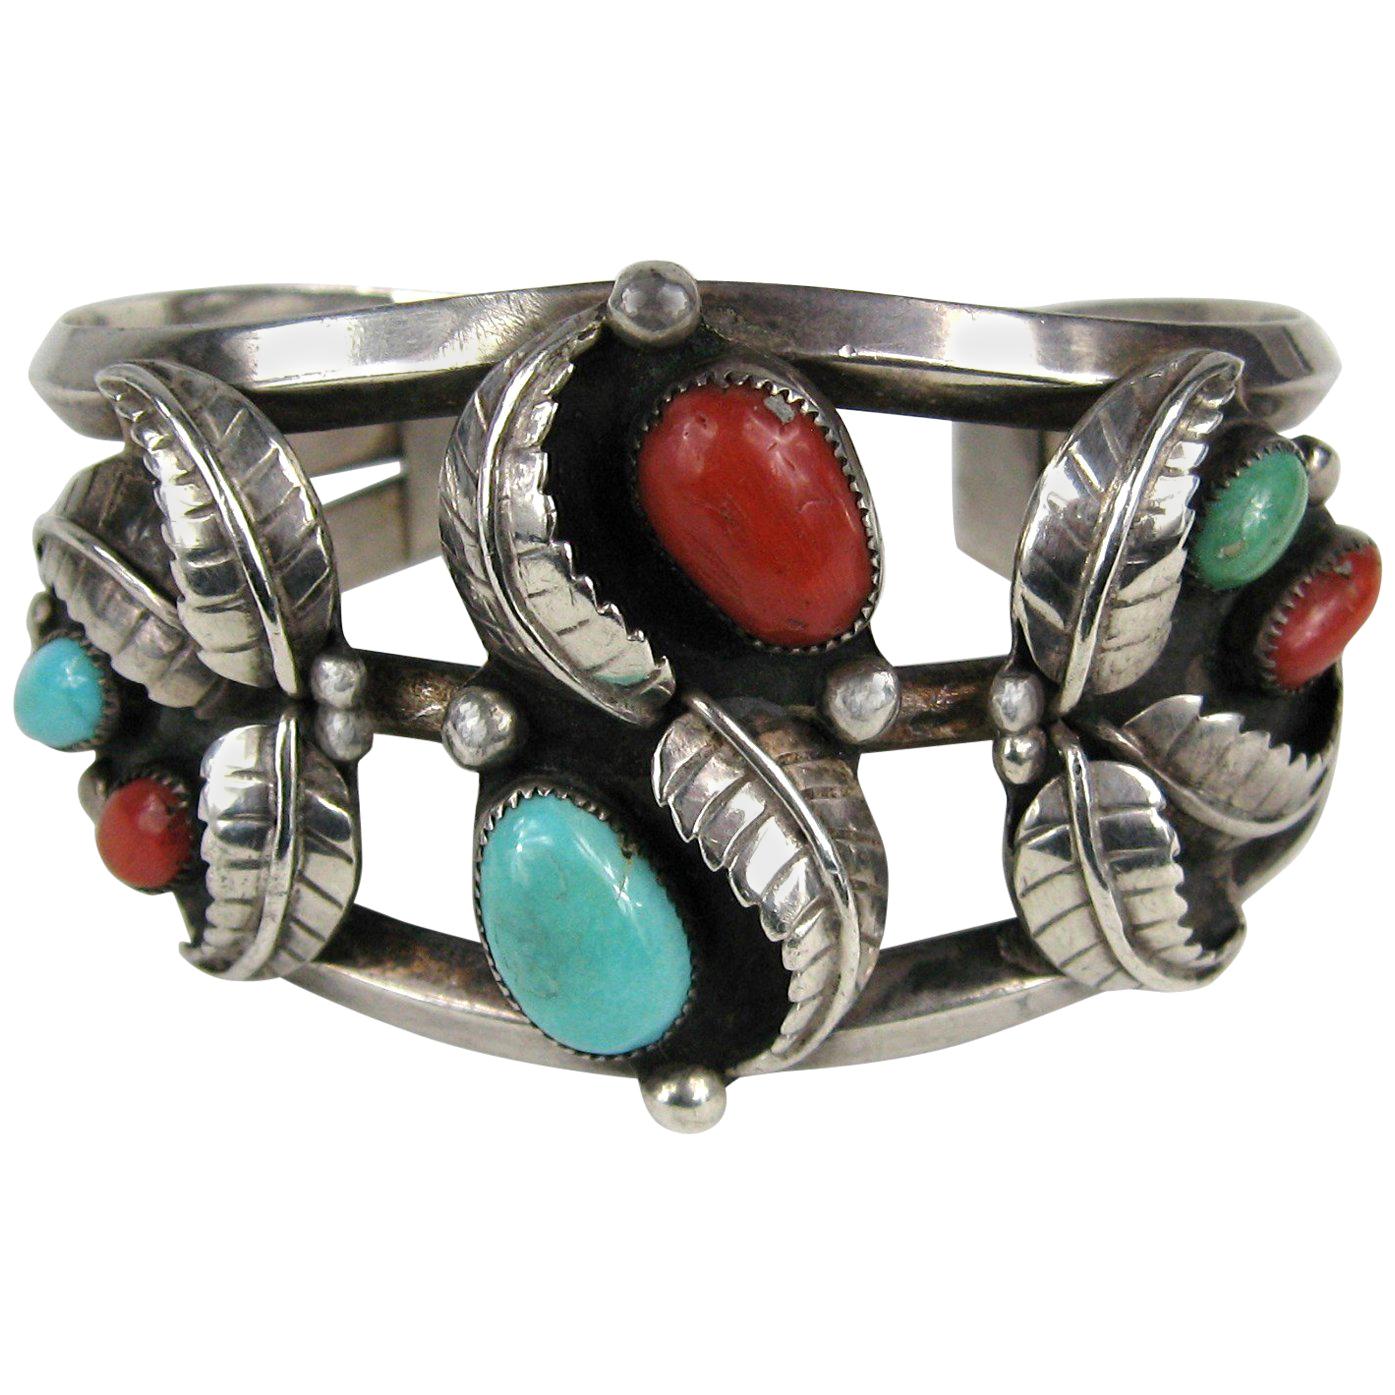 Sterling Silver Navajo Handmade Engraved Turquoise or Coral Stone Cuff Bracelet 